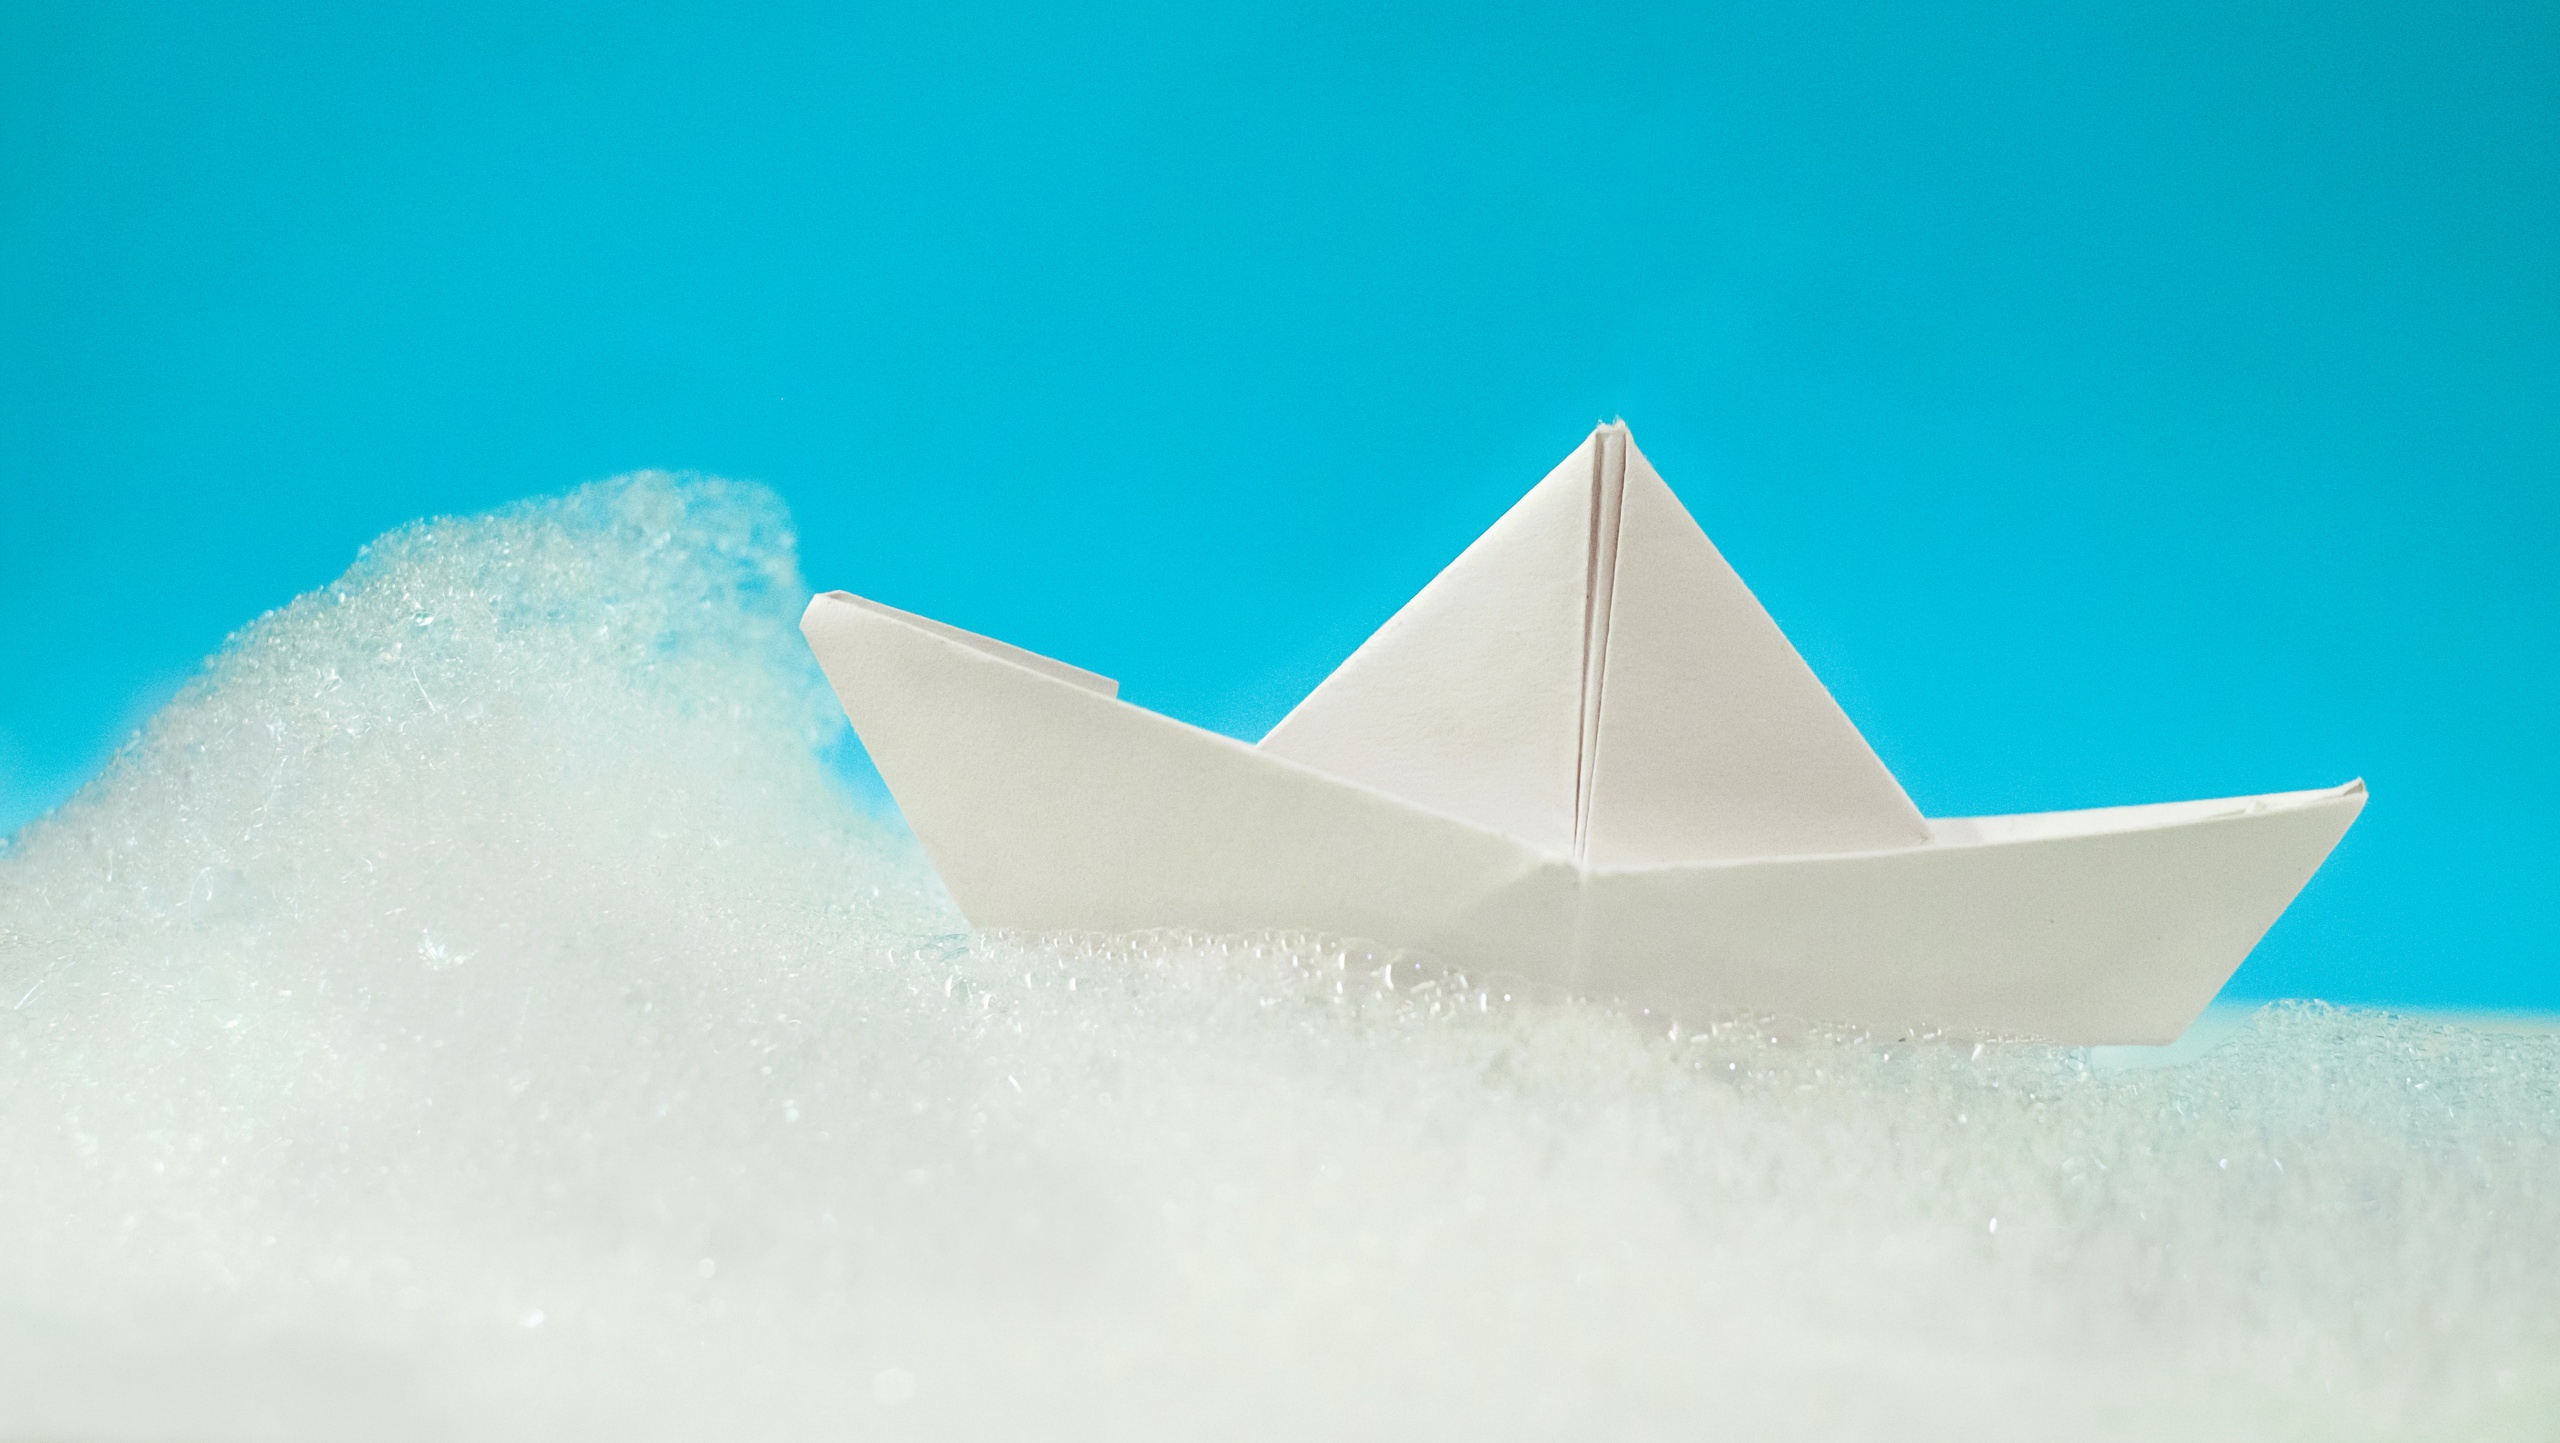 man made, origami, boat, paper boat